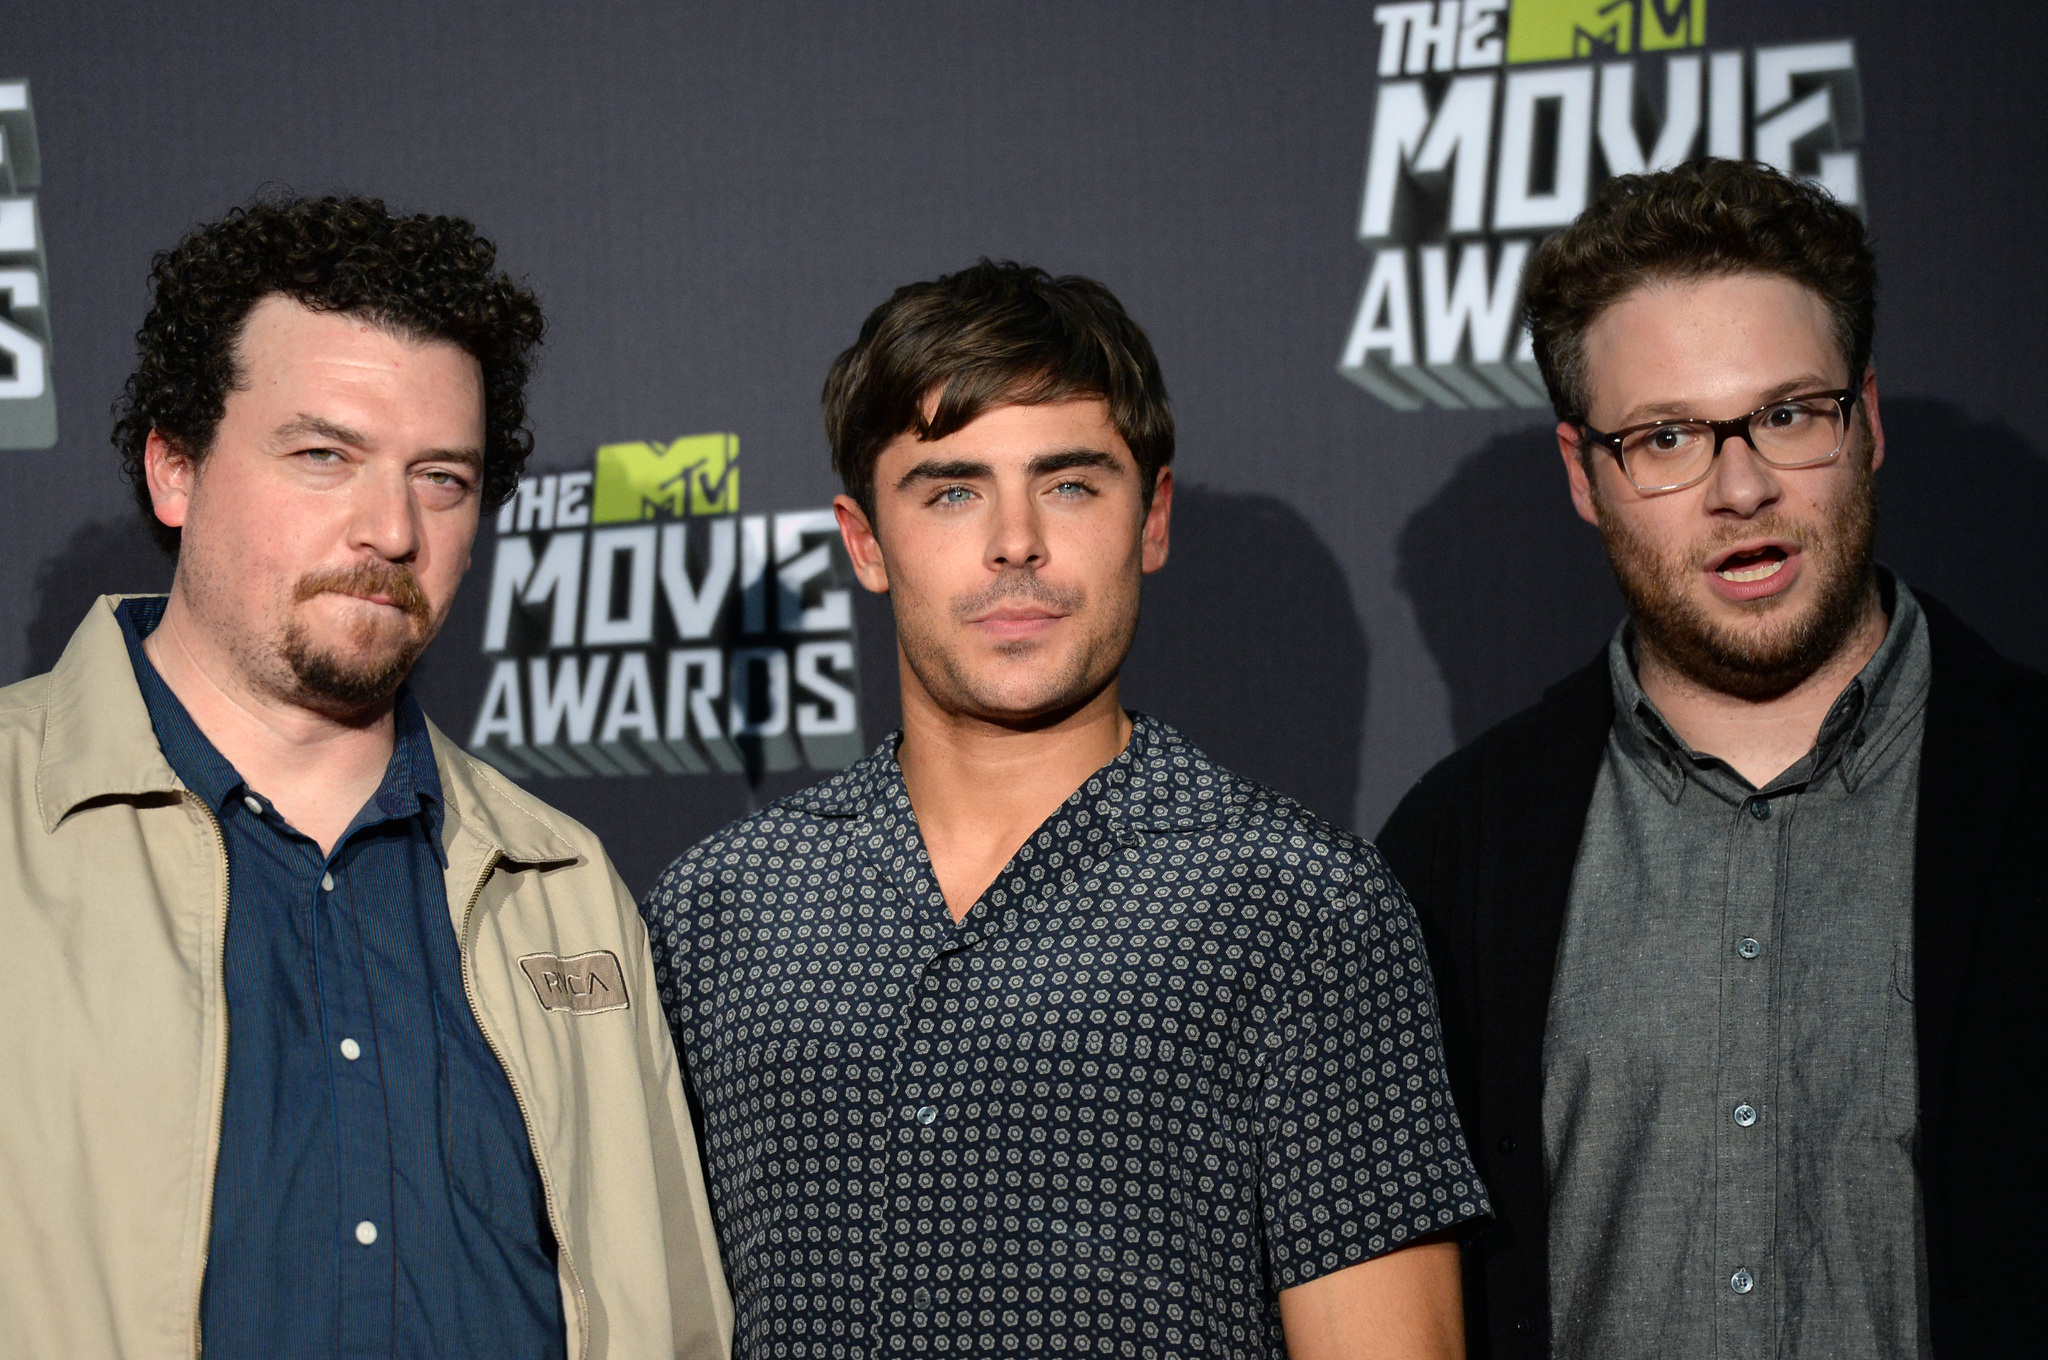 Seth Rogen, Danny McBride and Zac Efron at event of 2013 MTV Movie Awards (2013)